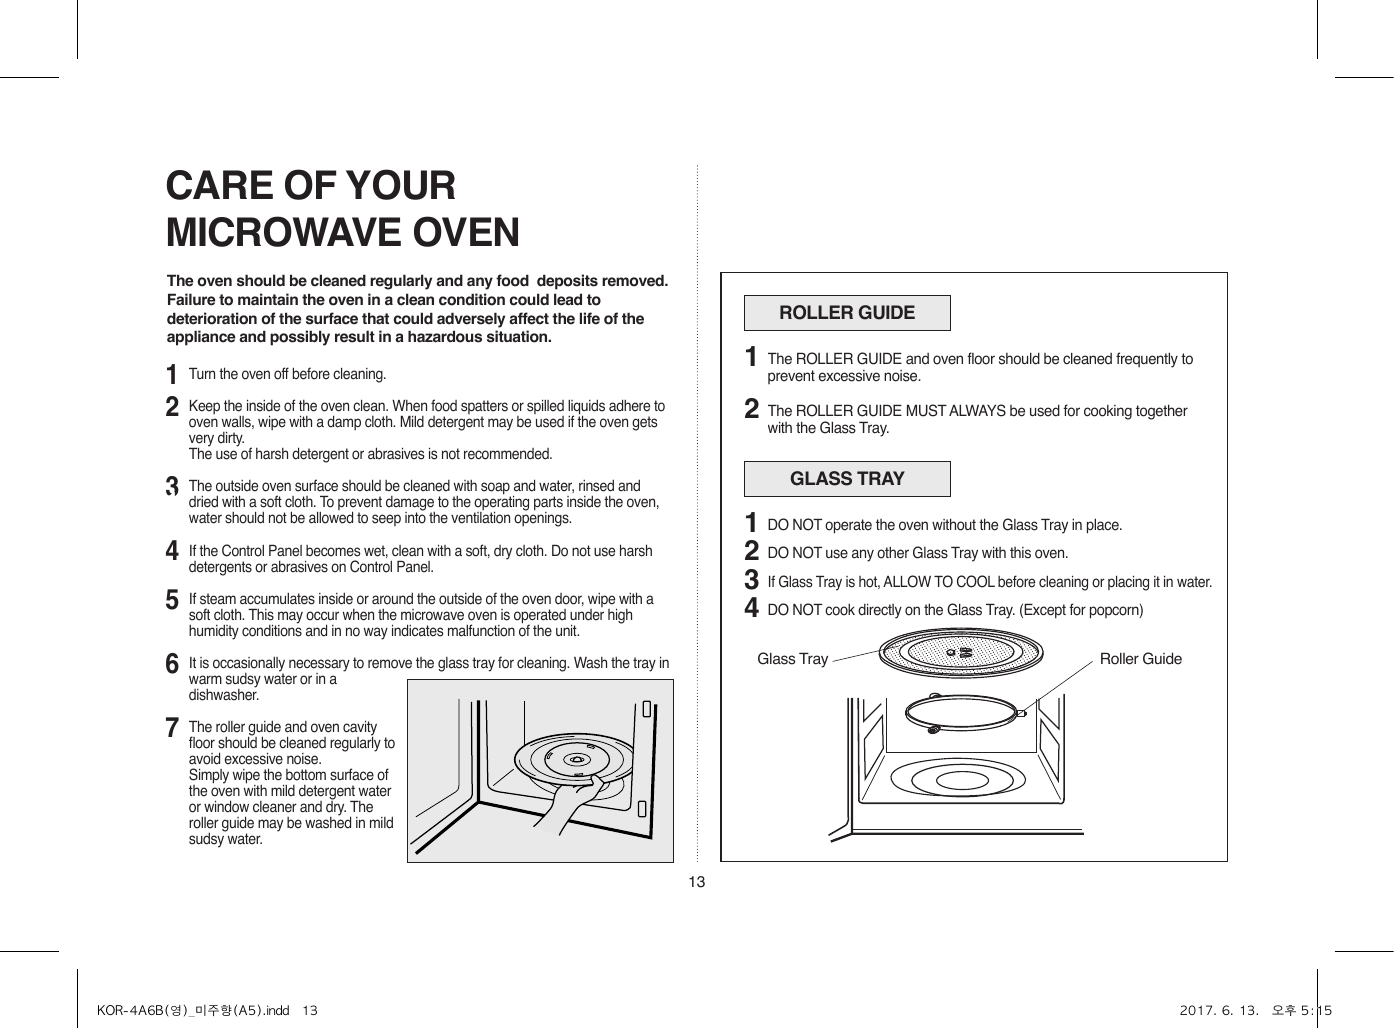 13CARE OF YOUR MICROWAVE OVENThe oven should be cleaned regularly and any food  deposits removed.Failure to maintain the oven in a clean condition could lead to deterioration of the surface that could adversely affect the life of the appliance and possibly result in a hazardous situation.ROLLER GUIDEThe ROLLER GUIDE and oven floor should be cleaned frequently to prevent excessive noise.The ROLLER GUIDE MUST ALWAYS be used for cooking together with the Glass Tray.12GLASS TRAYDO NOT operate the oven without the Glass Tray in place.DO NOT use any other Glass Tray with this oven.If Glass Tray is hot, ALLOW TO COOL before cleaning or placing it in water.DO NOT cook directly on the Glass Tray. (Except for popcorn)123412314567Turn the oven off before cleaning.Keep the inside of the oven clean. When food spatters or spilled liquids adhere to oven walls, wipe with a damp cloth. Mild detergent may be used if the oven gets very dirty.  The use of harsh detergent or abrasives is not recommended.The outside oven surface should be cleaned with soap and water, rinsed and dried with a soft cloth. To prevent damage to the operating parts inside the oven, water should not be allowed to seep into the ventilation openings.If the Control Panel becomes wet, clean with a soft, dry cloth. Do not use harsh detergents or abrasives on Control Panel.If steam accumulates inside or around the outside of the oven door, wipe with a soft cloth. This may occur when the microwave oven is operated under high humidity conditions and in no way indicates malfunction of the unit.It is occasionally necessary to remove the glass tray for cleaning. Wash the tray in warm sudsy water or in a dishwasher.The roller guide and oven cavity floor should be cleaned regularly to avoid excessive noise. Simply wipe the bottom surface of the oven with mild detergent water or window cleaner and dry. The roller guide may be washed in mild sudsy water.Roller GuideGlass TrayKOR-4A6B(영)_미주향(A5).indd   13 2017. 6. 13.   오후 5:15